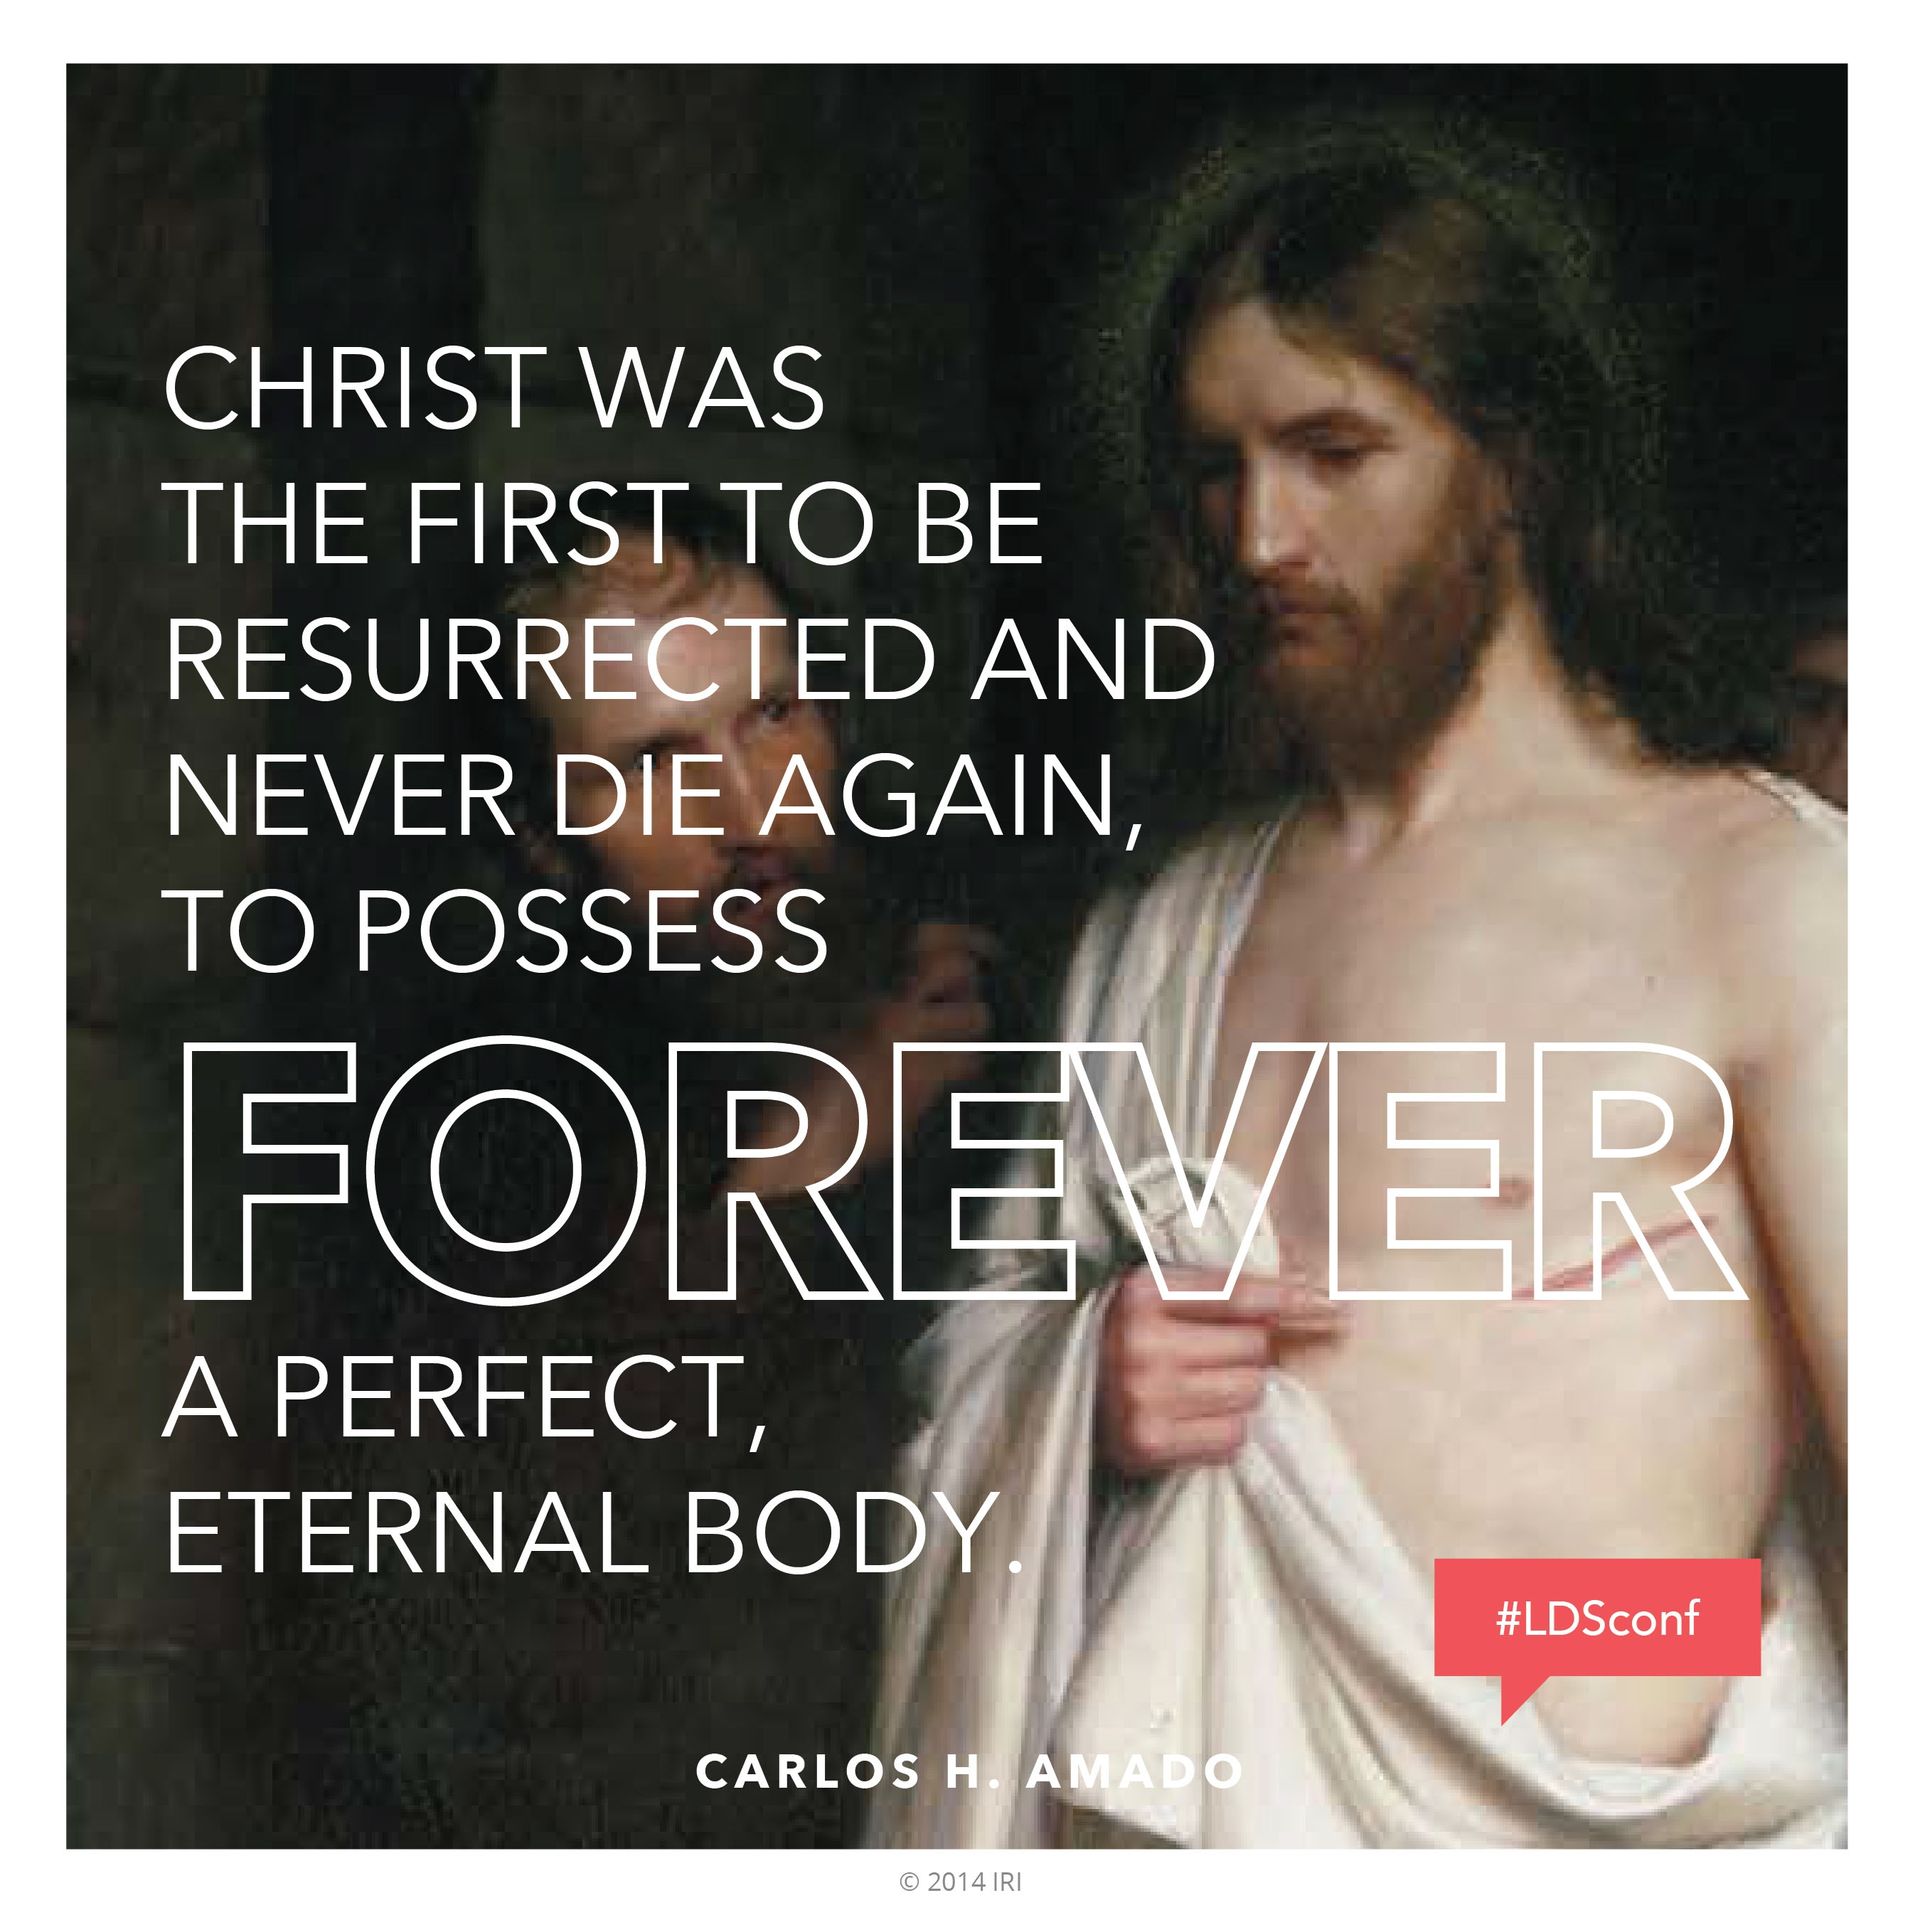 “Christ was the first to be resurrected and never die again, to possess forever a perfect, eternal body.”—Elder Carlos H. Amado, “Christ the Redeemer” © undefined ipCode 1.